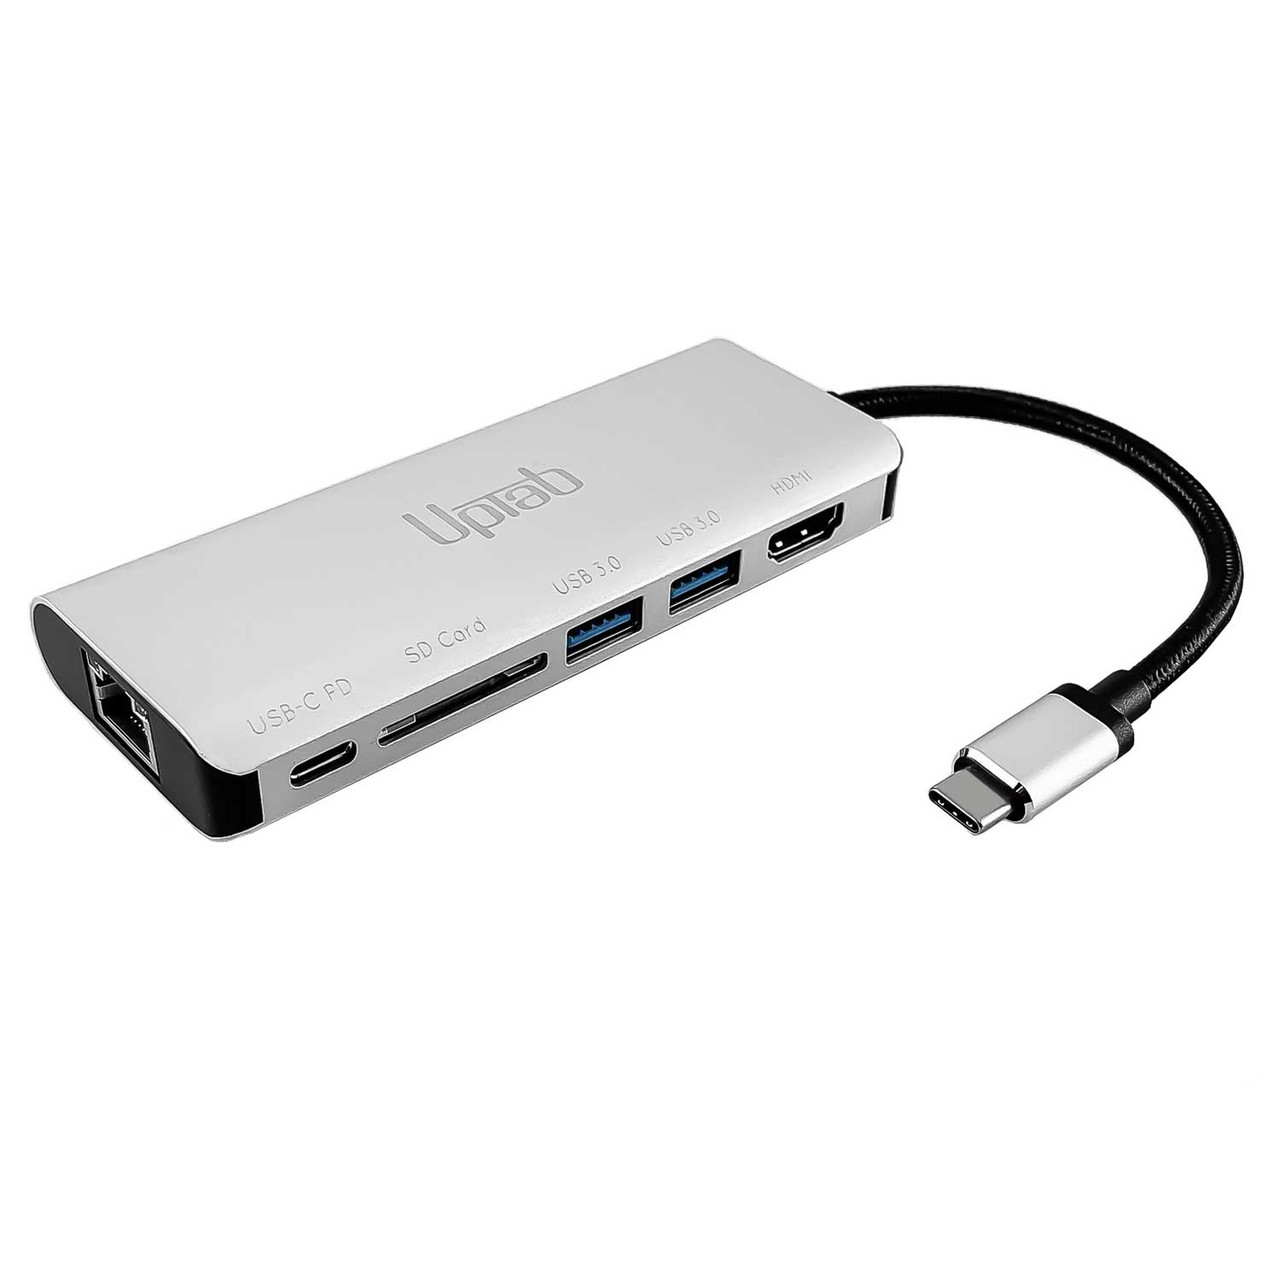 Converter Cable Adapter USB-C™ to USB 3.0, HDMI and PD - USB